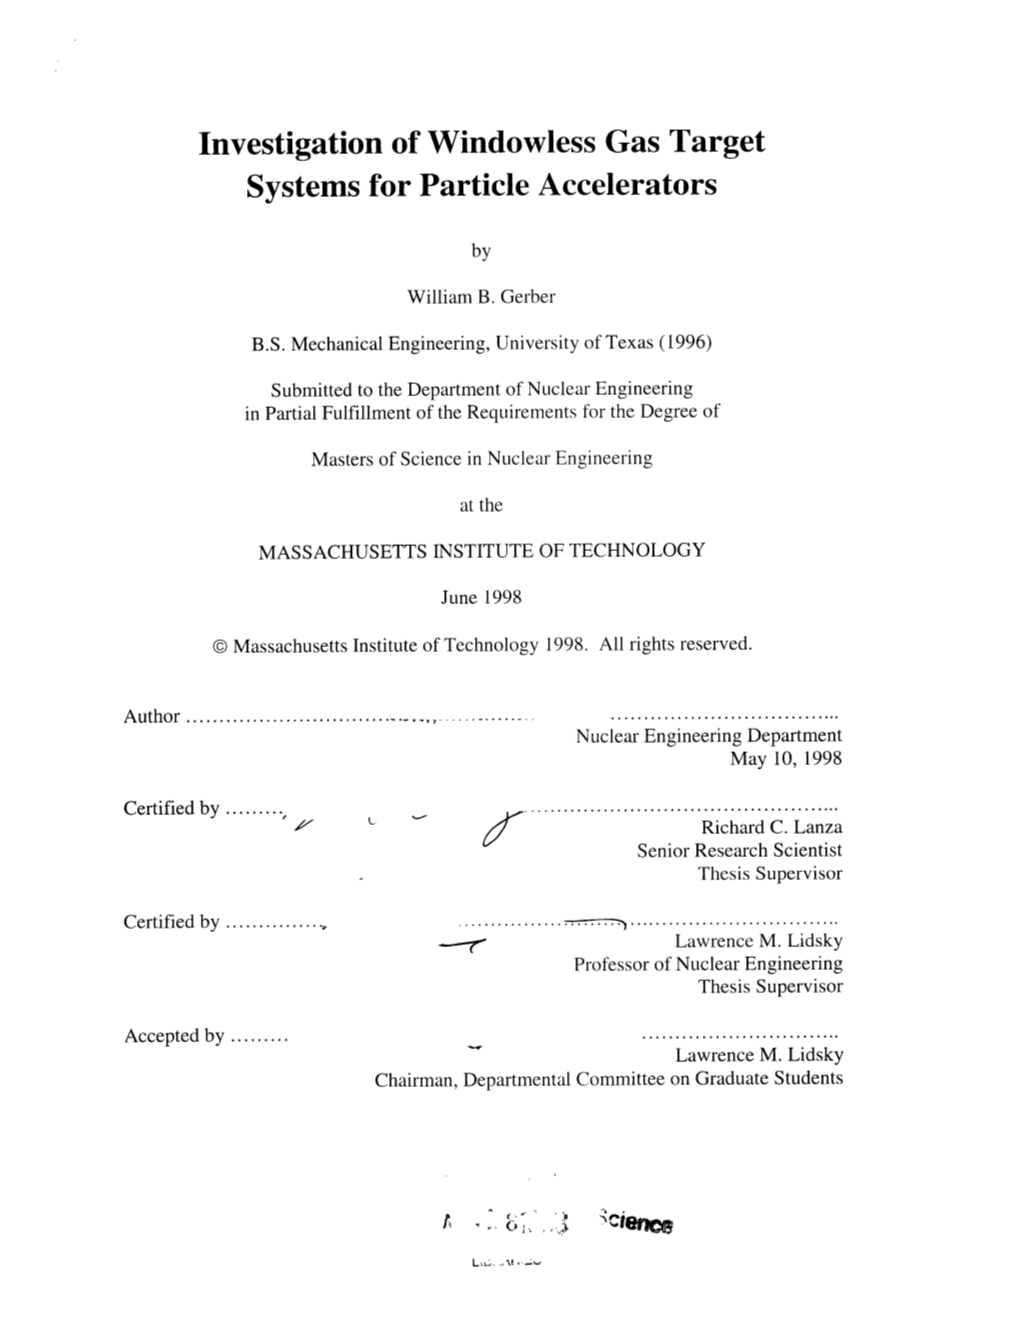 Investigation of Windowless Gas Target Systems for Particle Accelerators